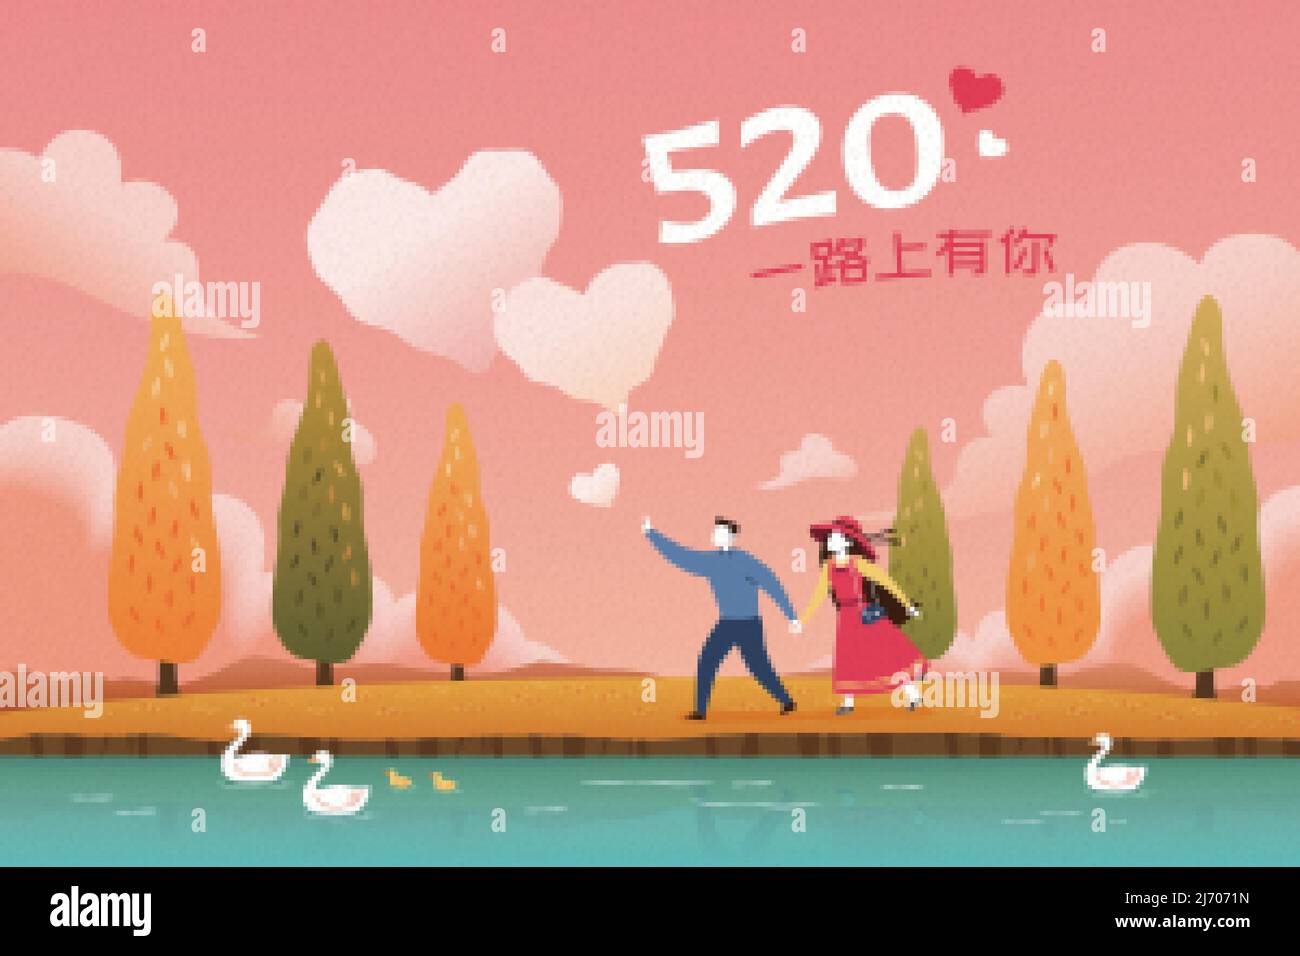 Couple dating on Valentine. Illustration of a man taking a stroll hand in hand with a woman in dress along a duck pond. Chinese translation: All the w Stock Vector